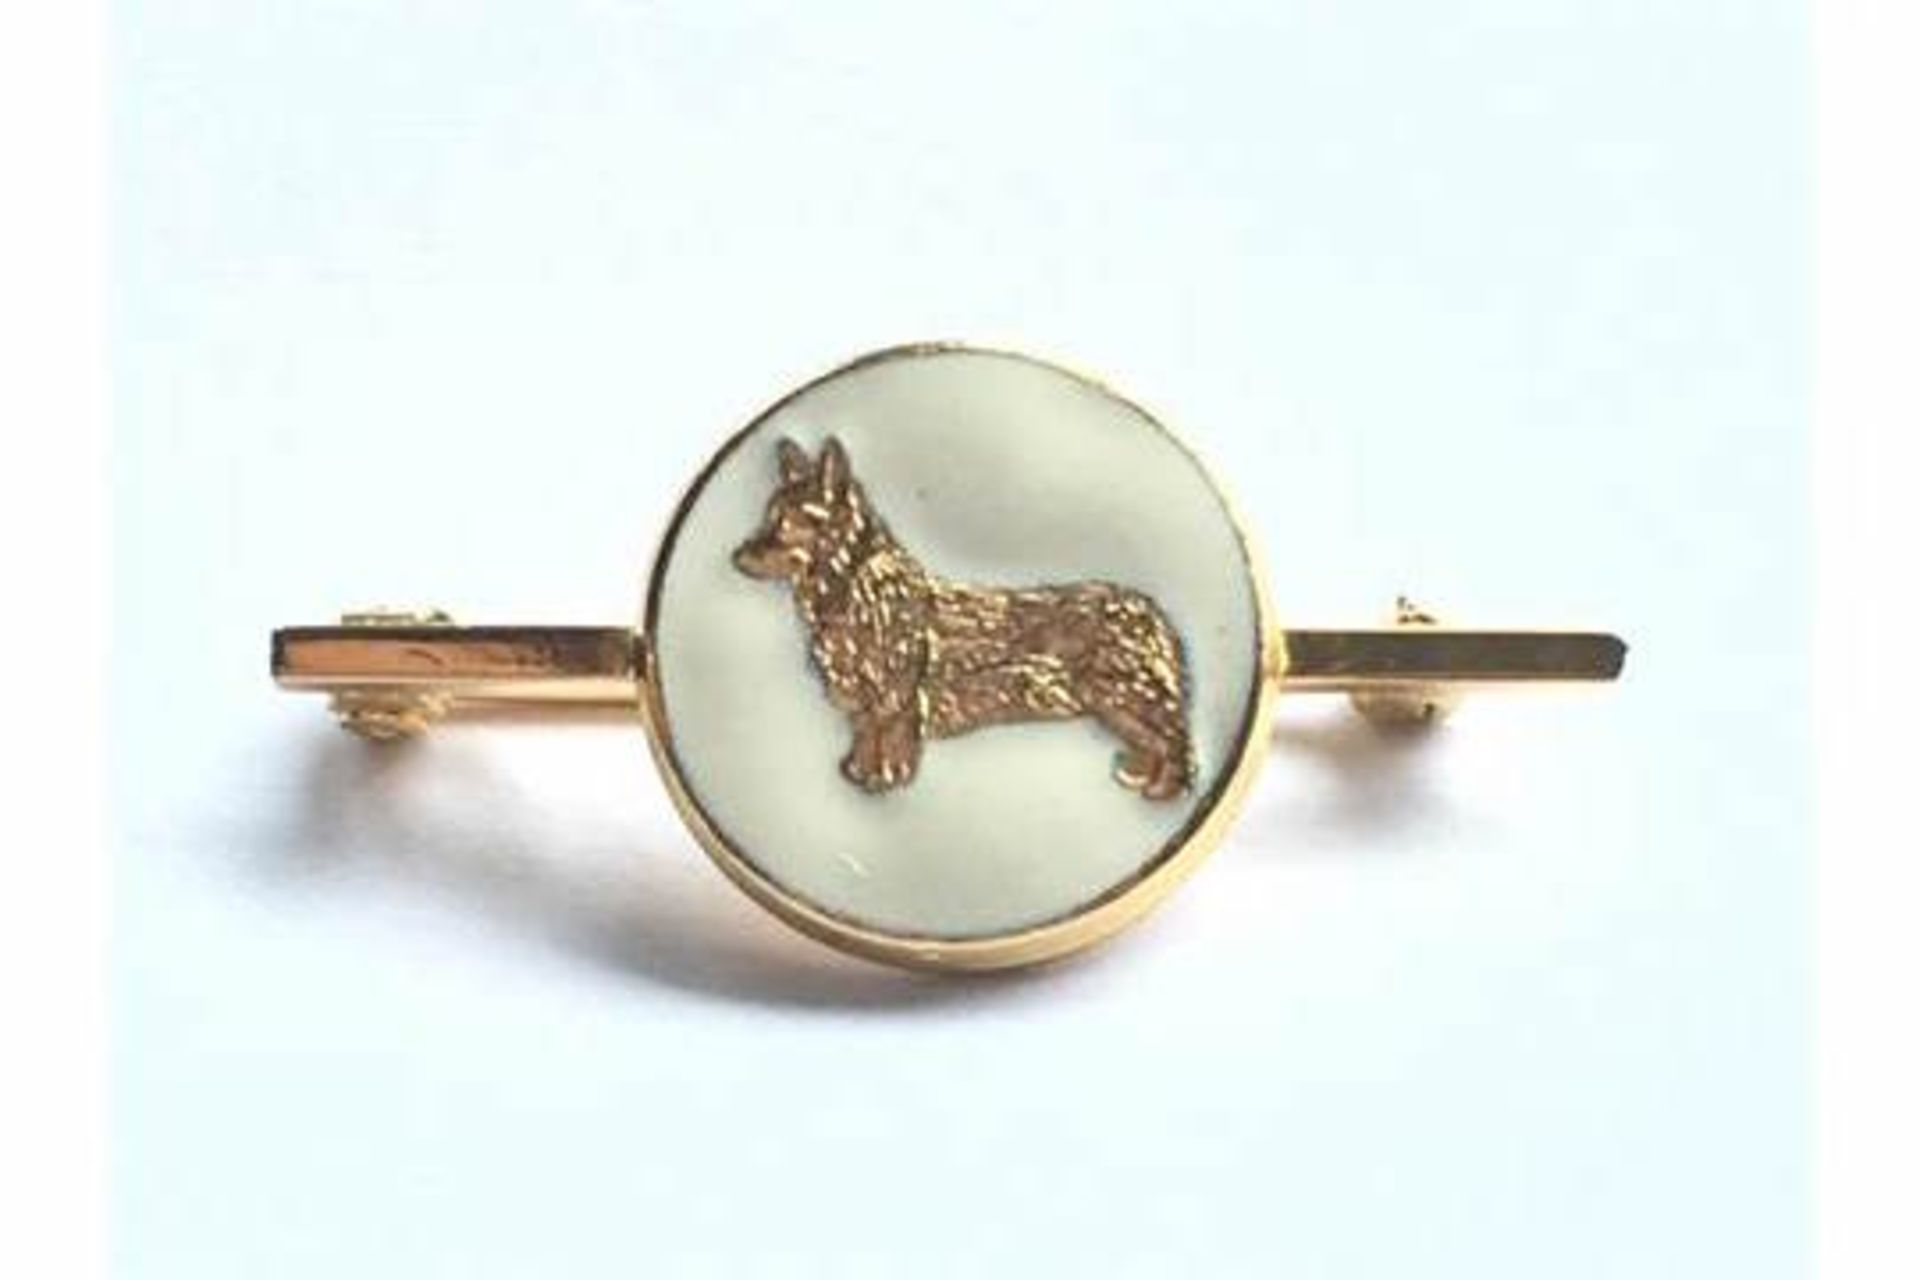 A VINTAGE ENAMEL BROOCH WITH WELSH CORGI, SIGNED M P (WITH CROWN). With free UK delivery.